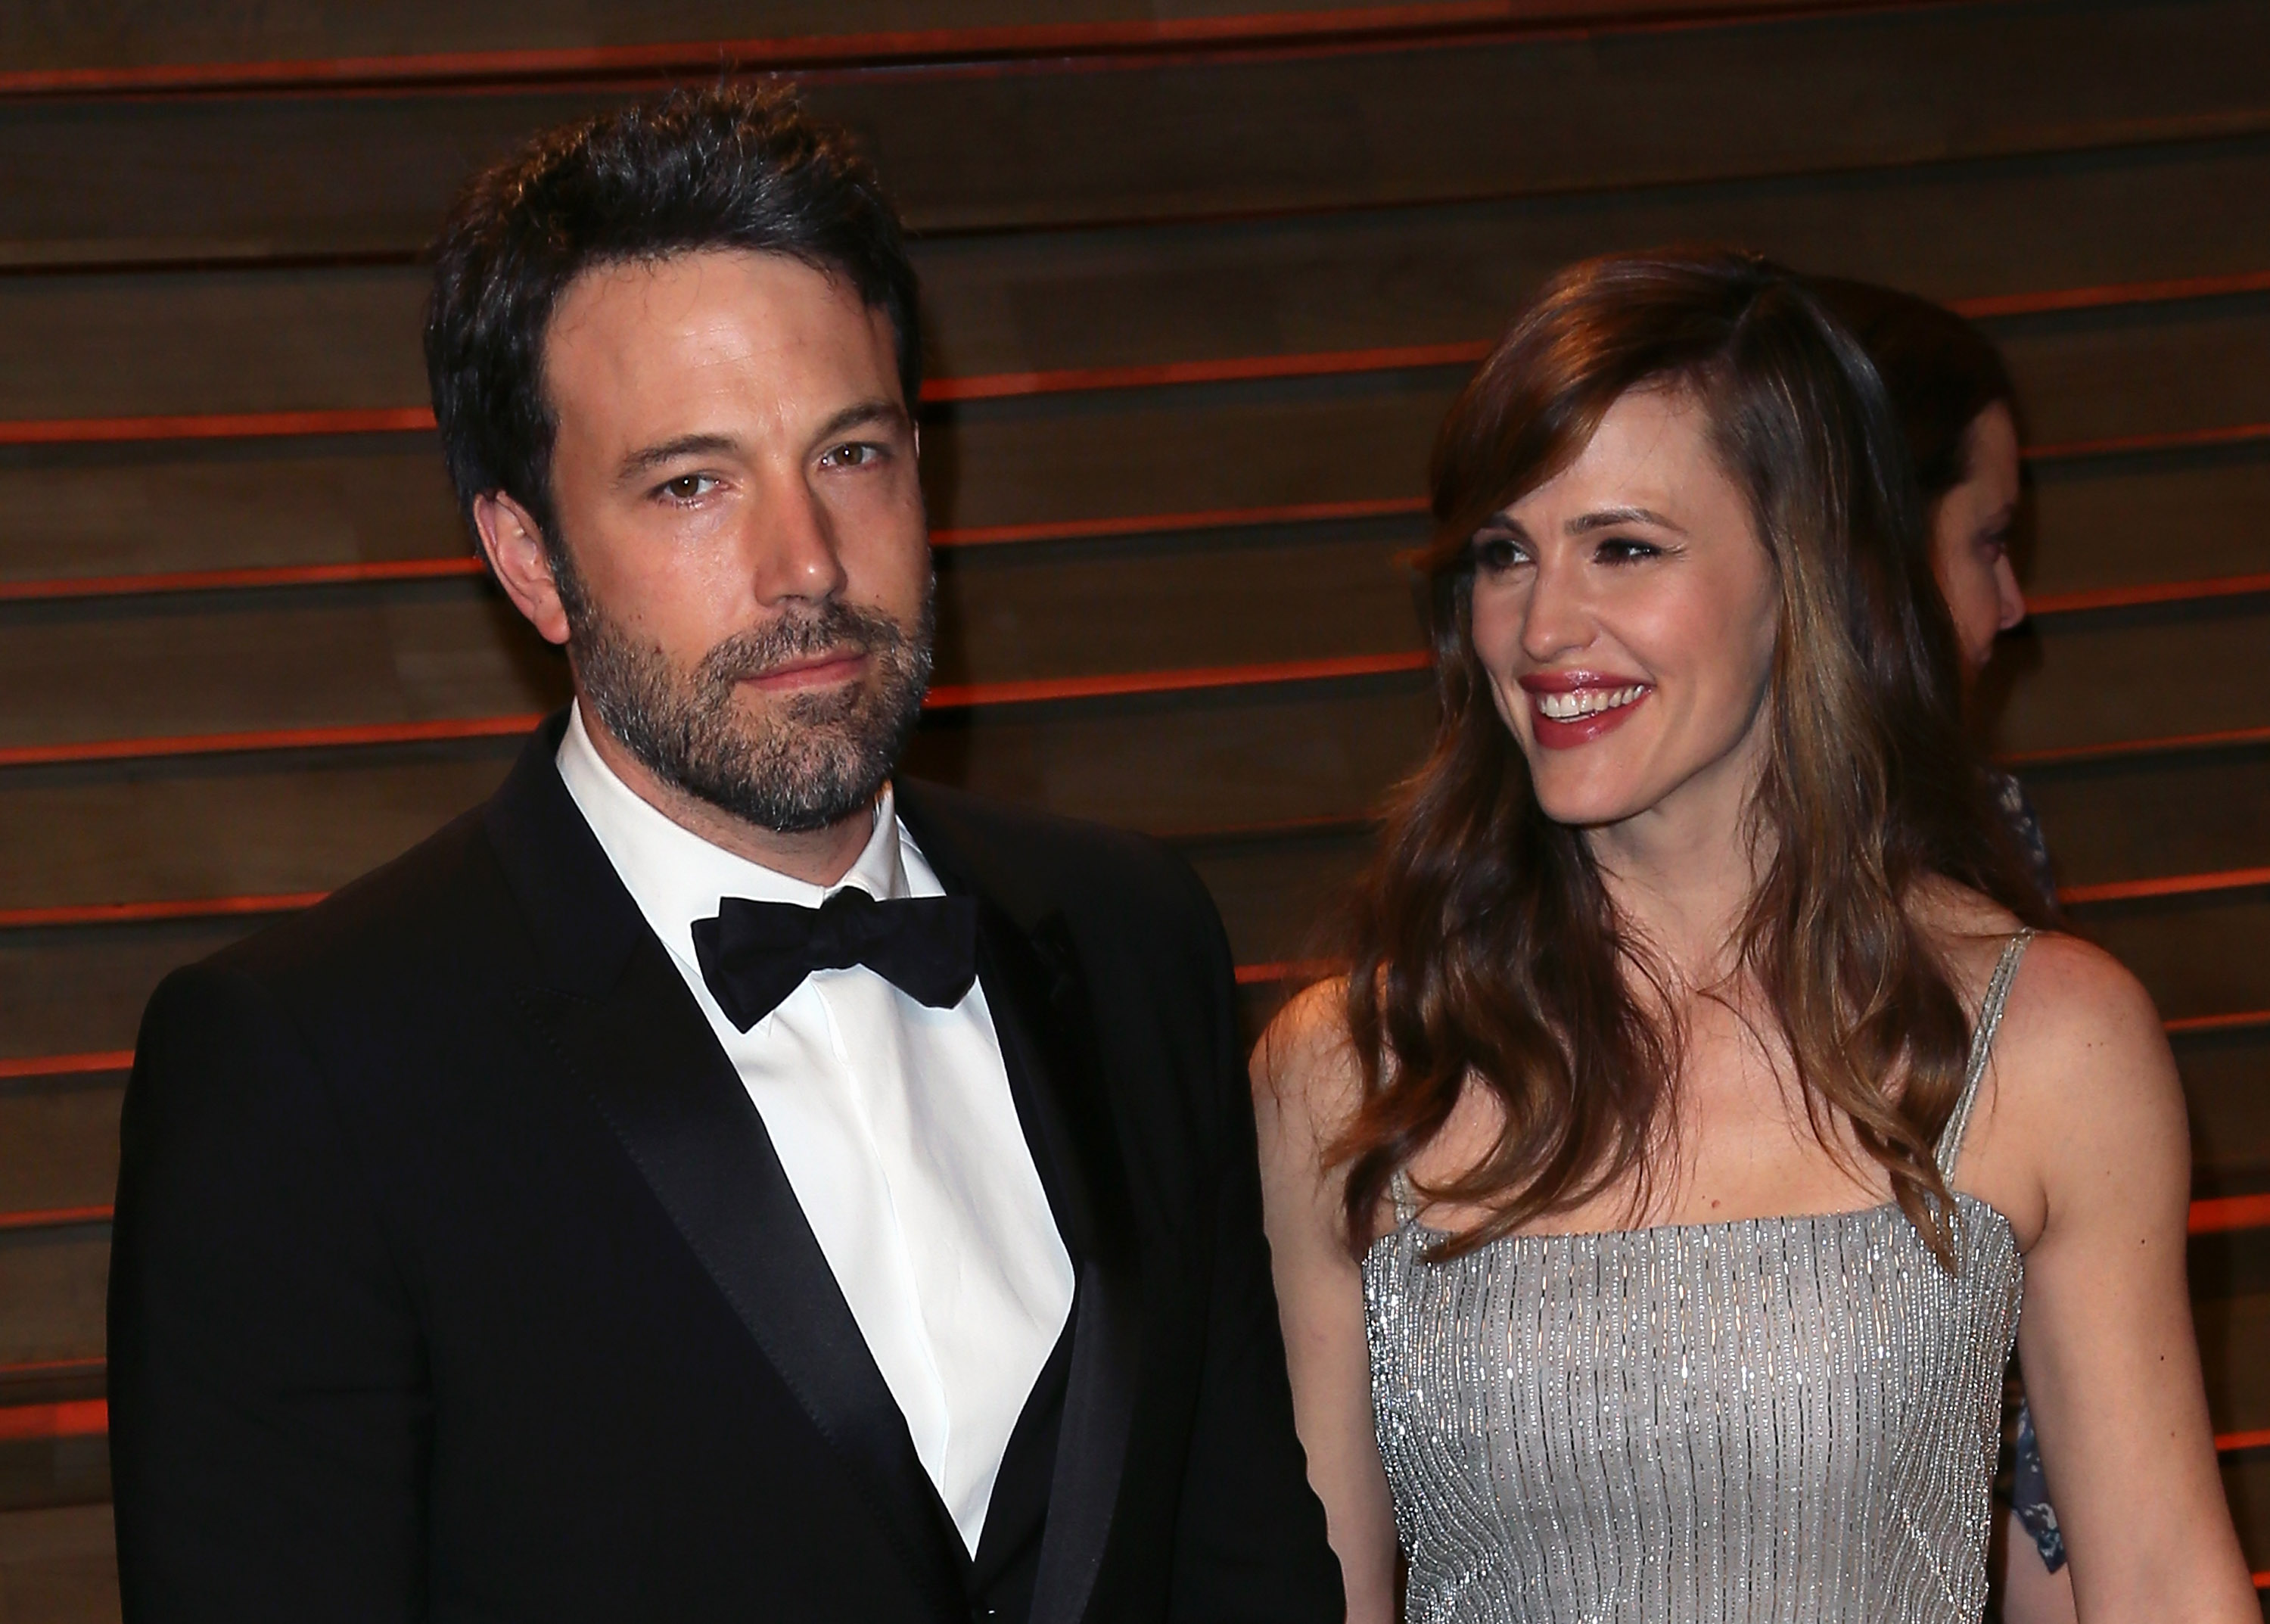 Actor/director Ben Affleck and actress Jennifer Garner attend the 2014 Vanity Fair Oscar Party hosted by Graydon Carter on March 2, 2014 in West Hollywood, California. (David Livingston—Getty Images)